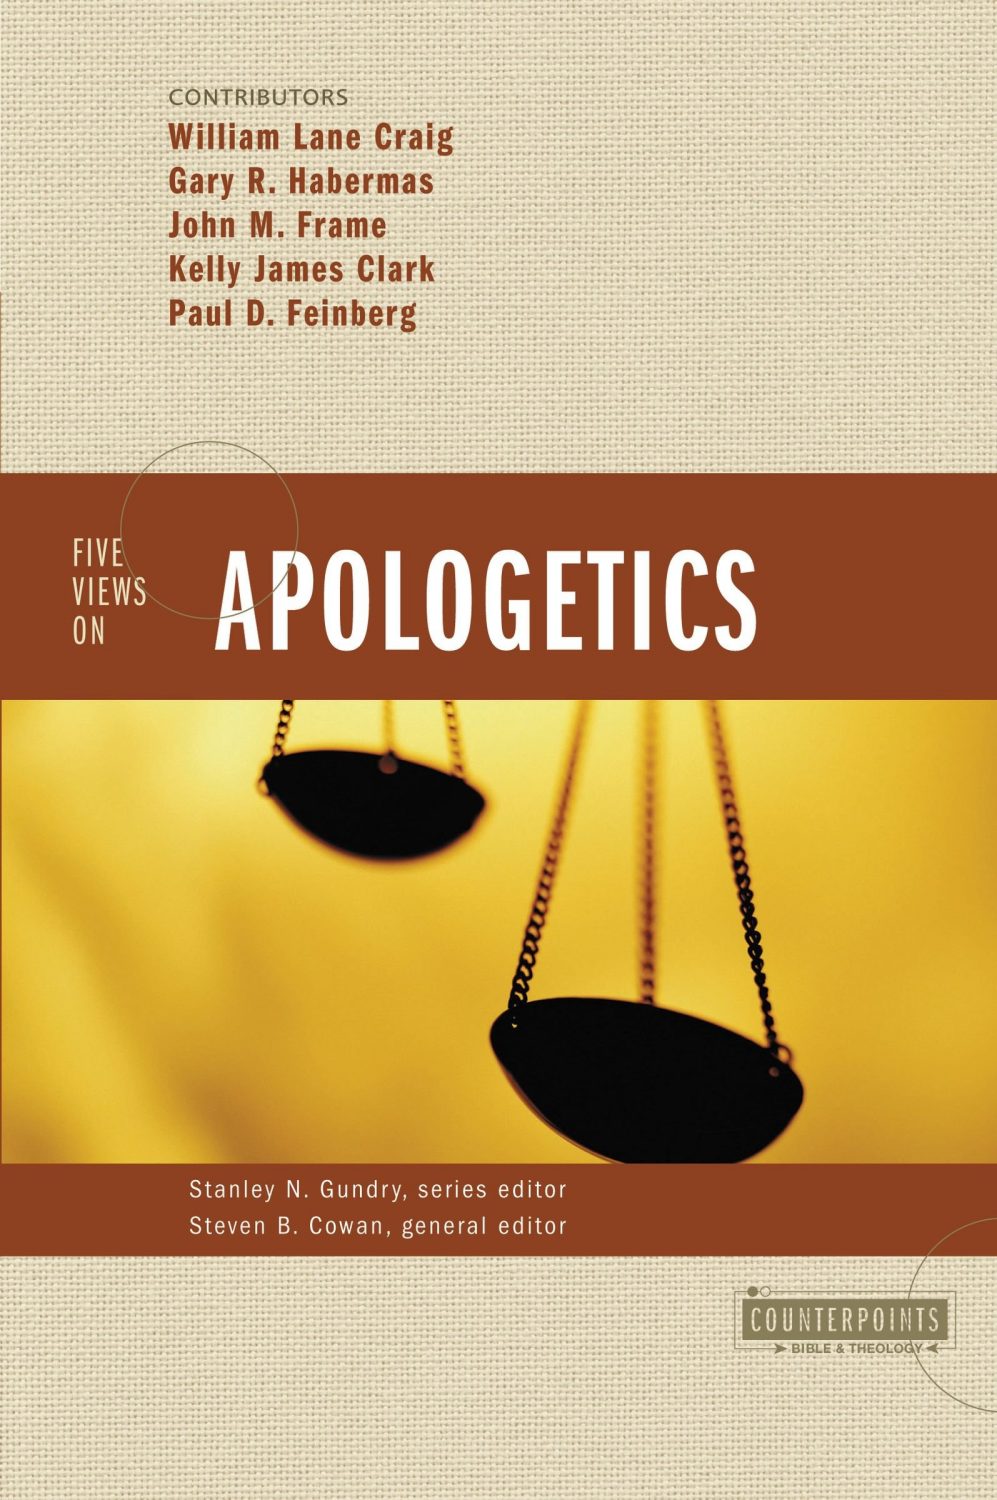 Views On Apologetics Counterpoint Series